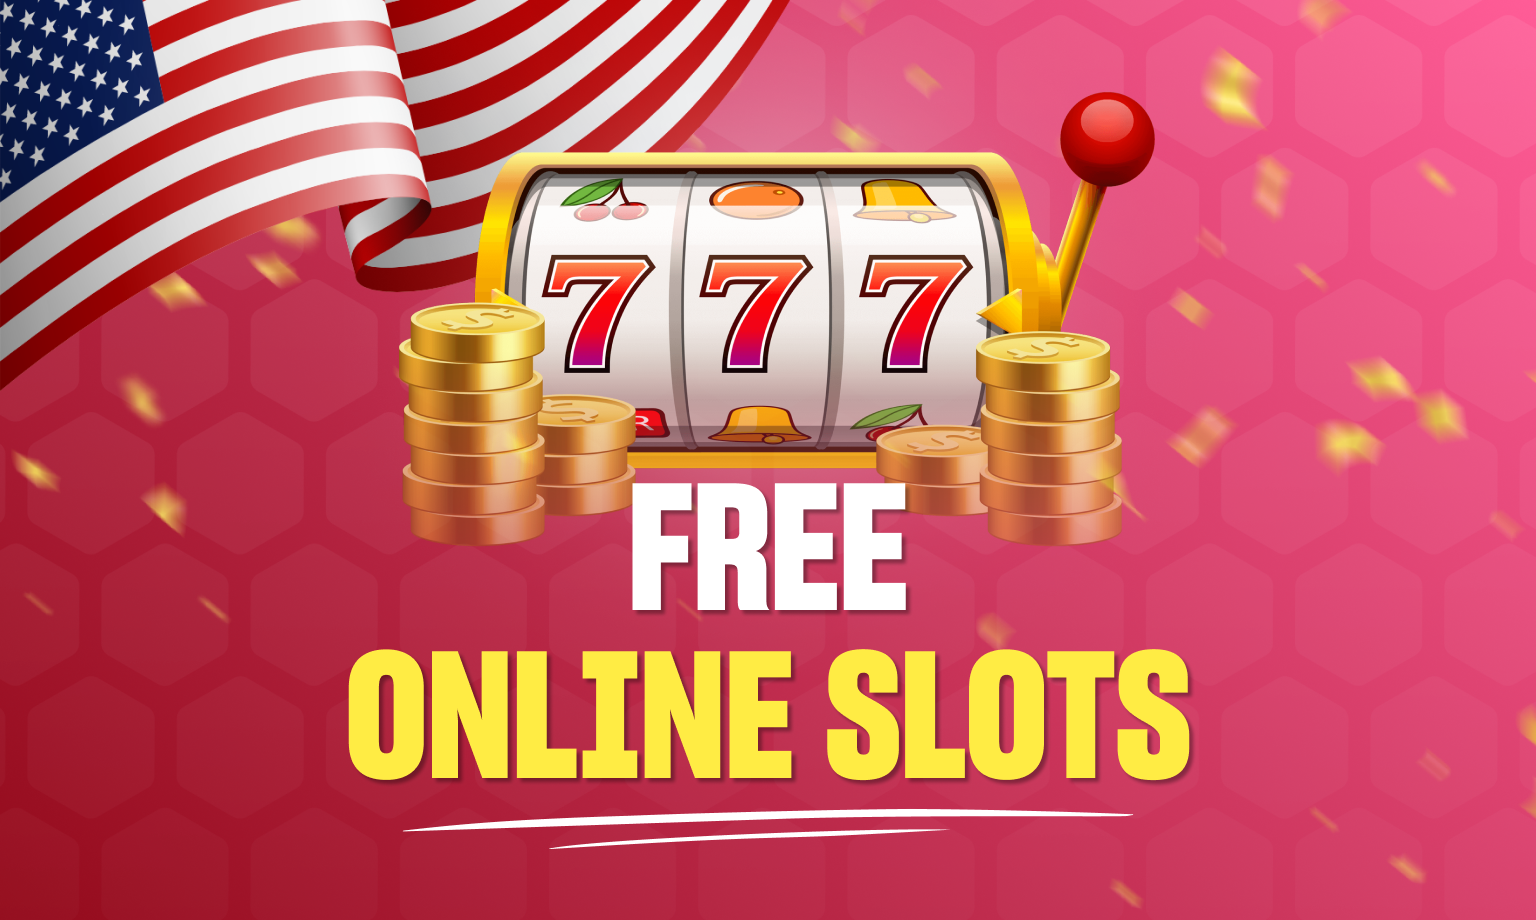 Free Casino Slots No Download No Registration – How to Play and Win Big Casino Strategies